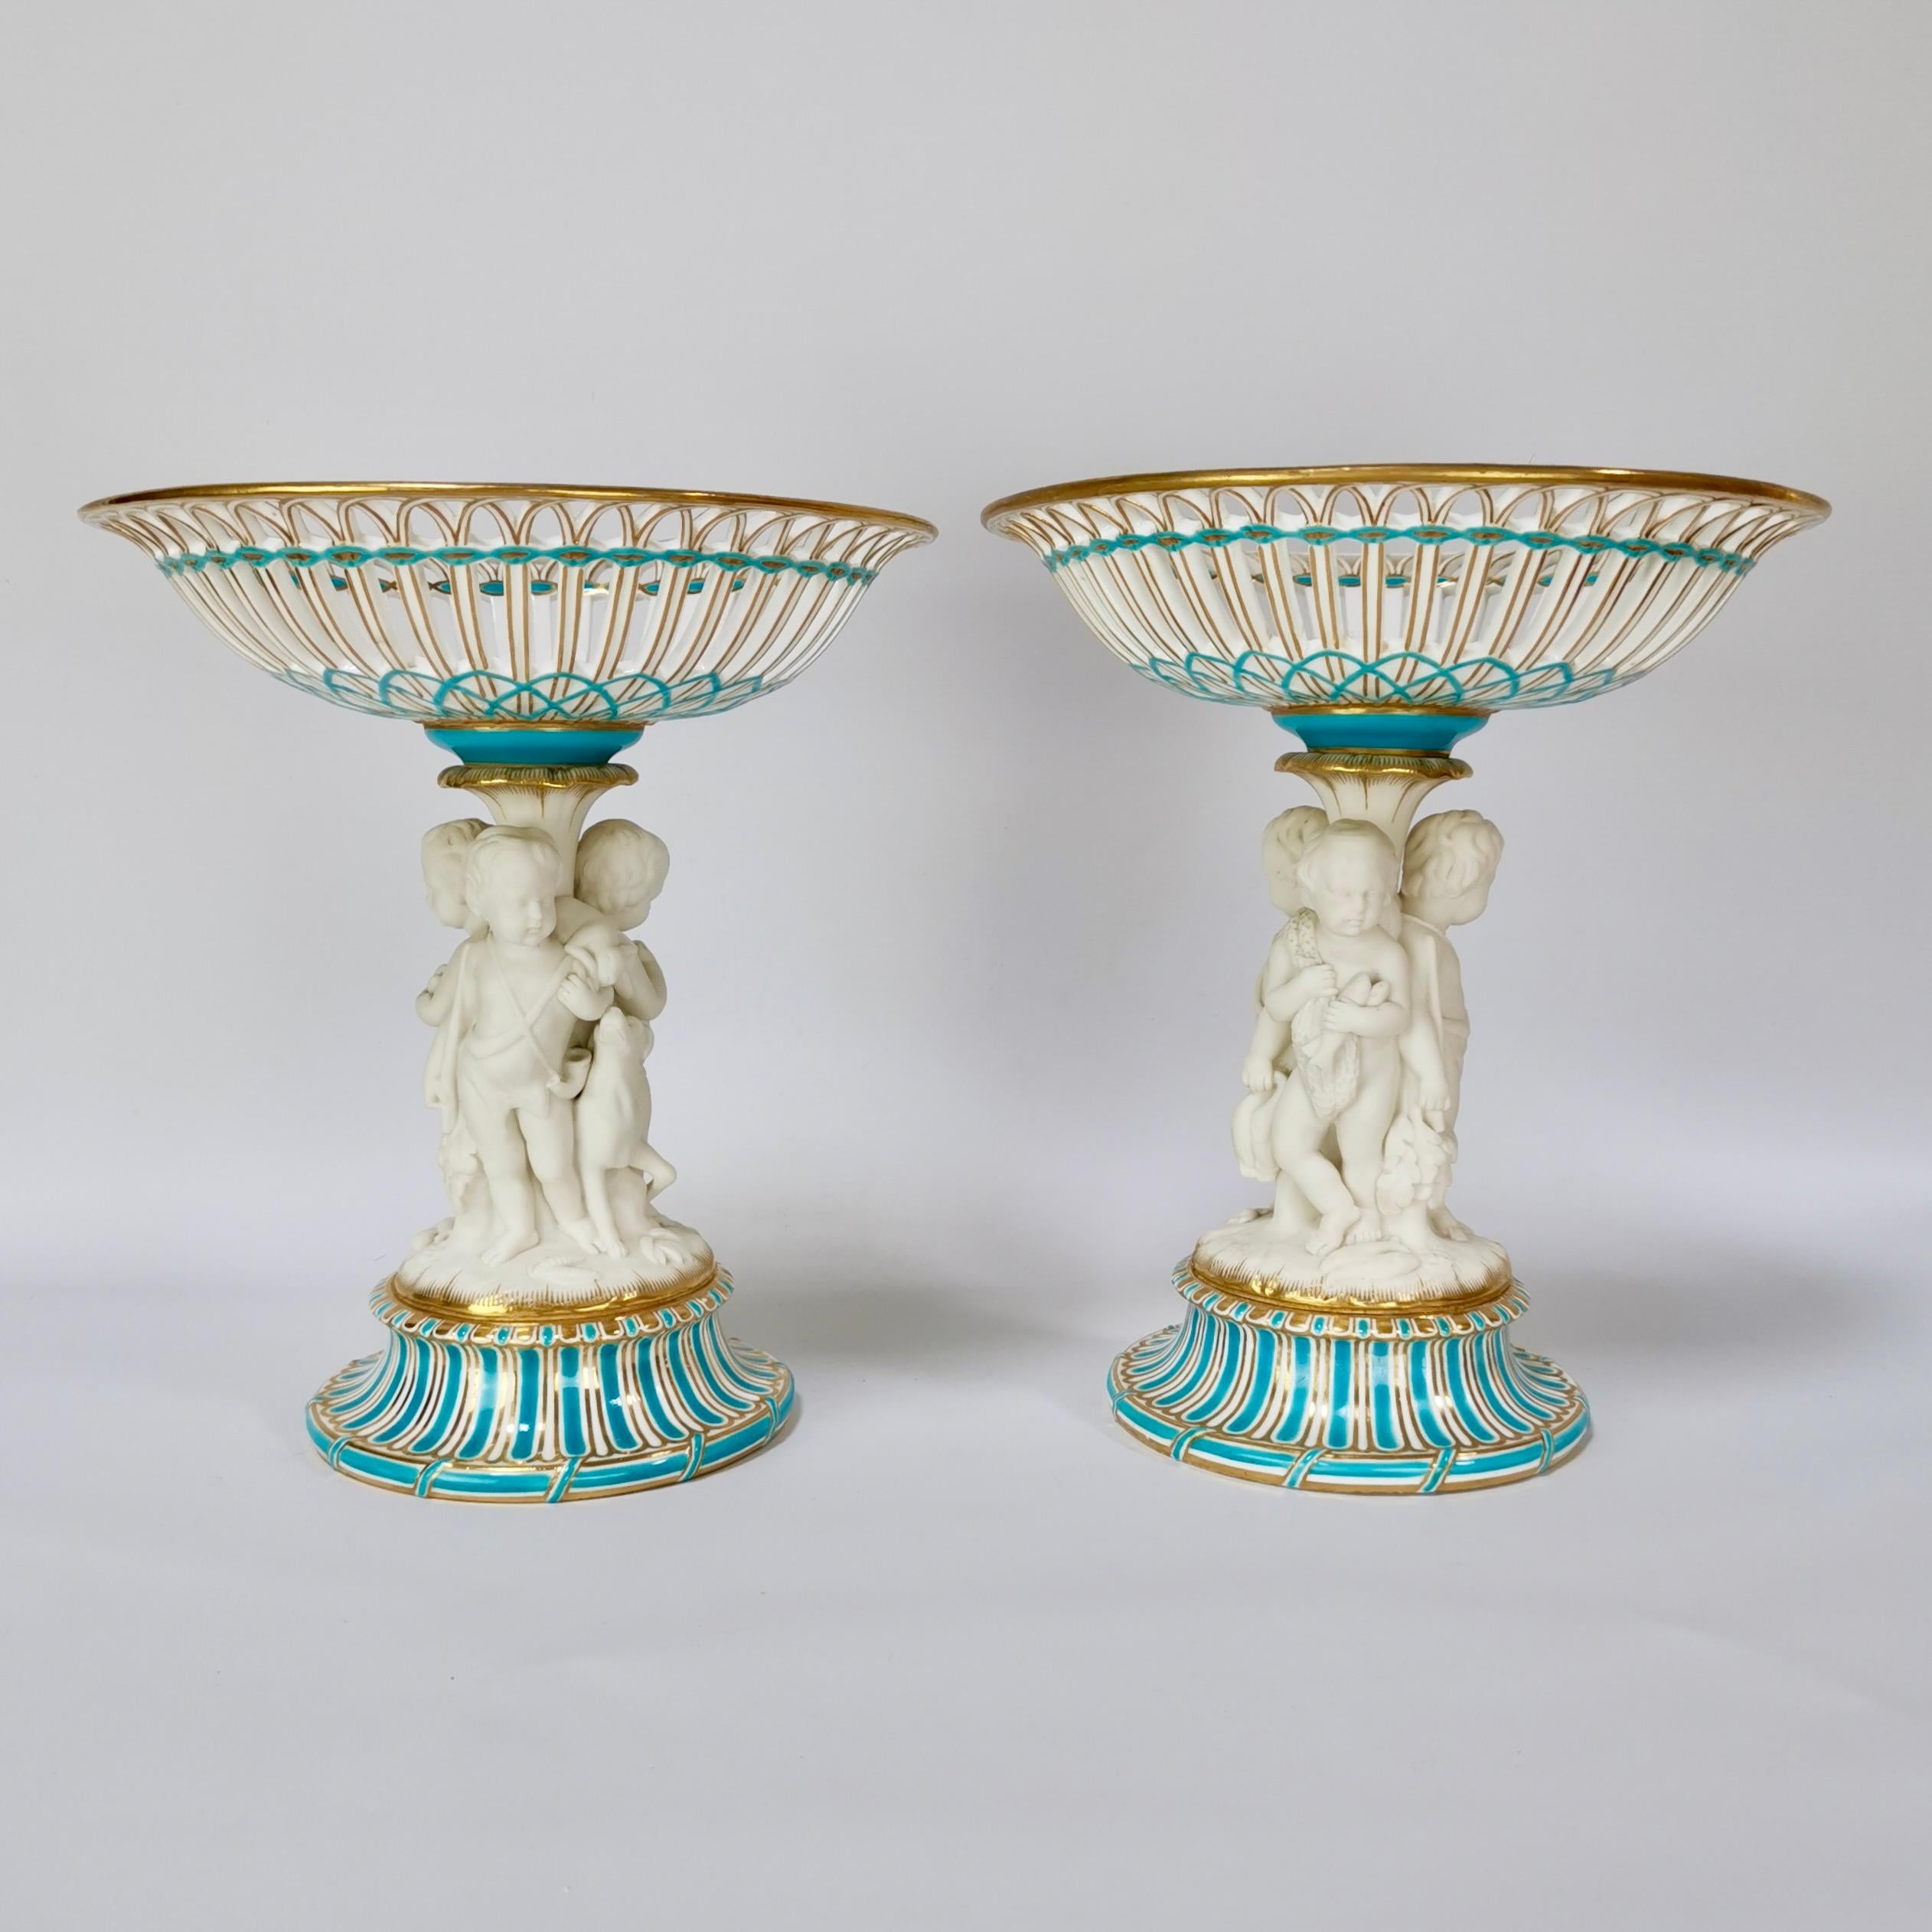 This is a spectacular pair of tazzas or comports made by Minton in about 1880, which was the Victorian era. The stems of the tazzas hold three white Parian porcelain hunting cherubs and their dog. These tazzas would make a fabulous display on your